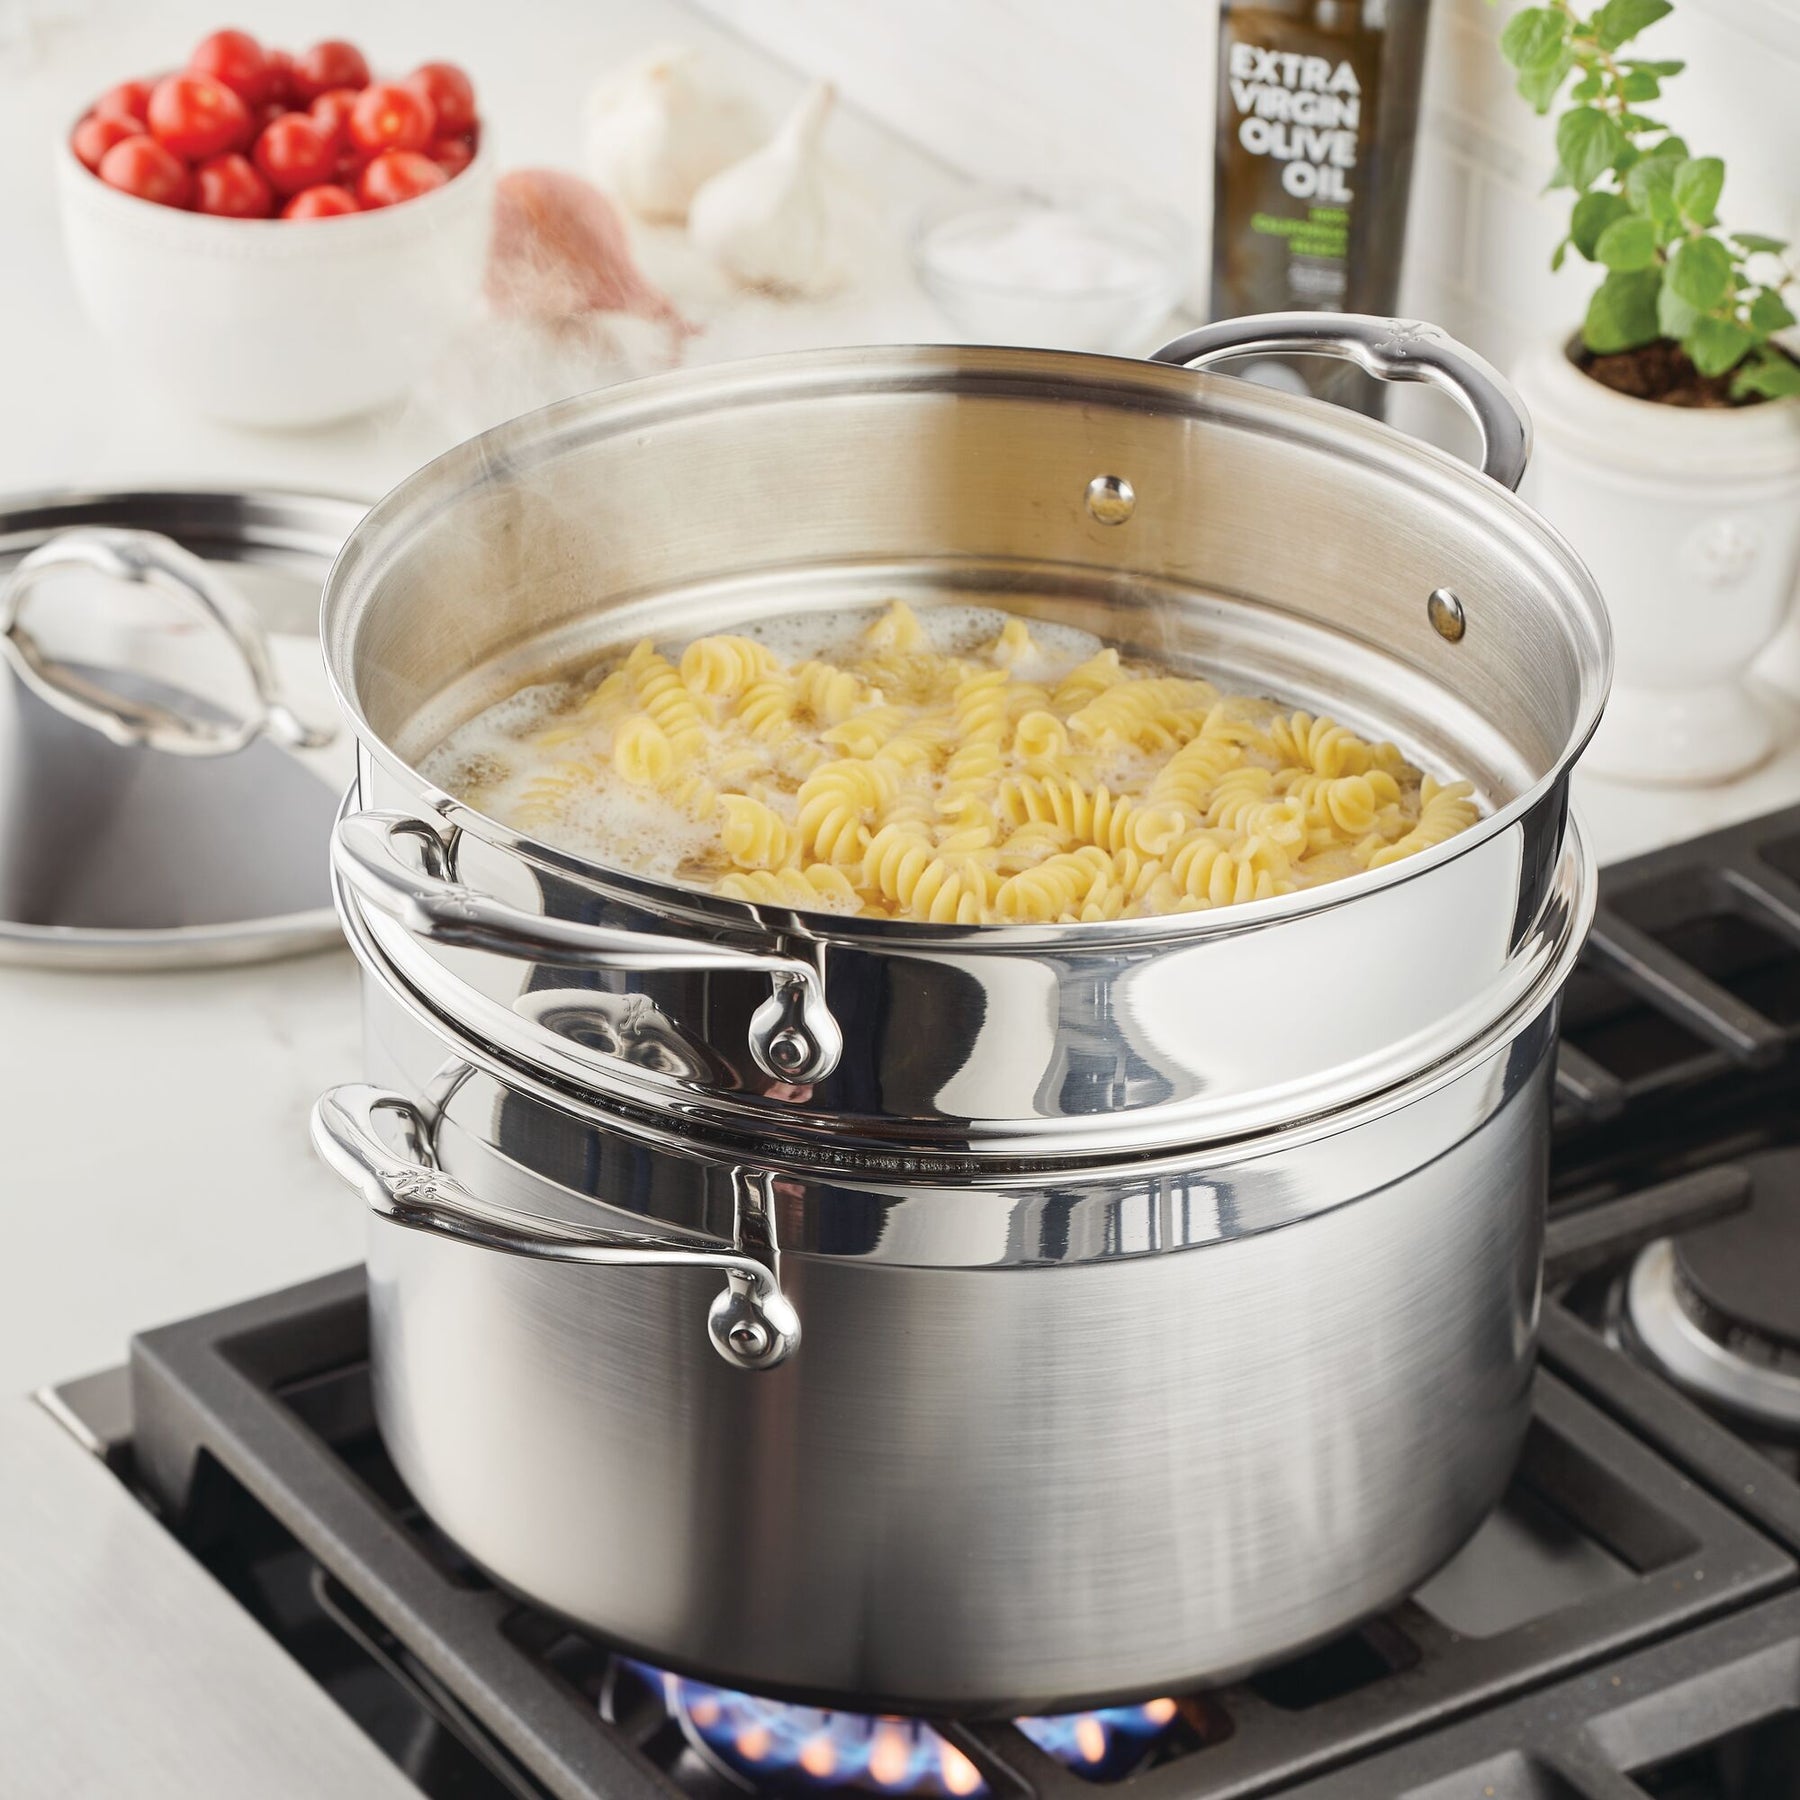 Buy Pinnacle Thermo Stainless Steel Inner Casseroles - Set of 1